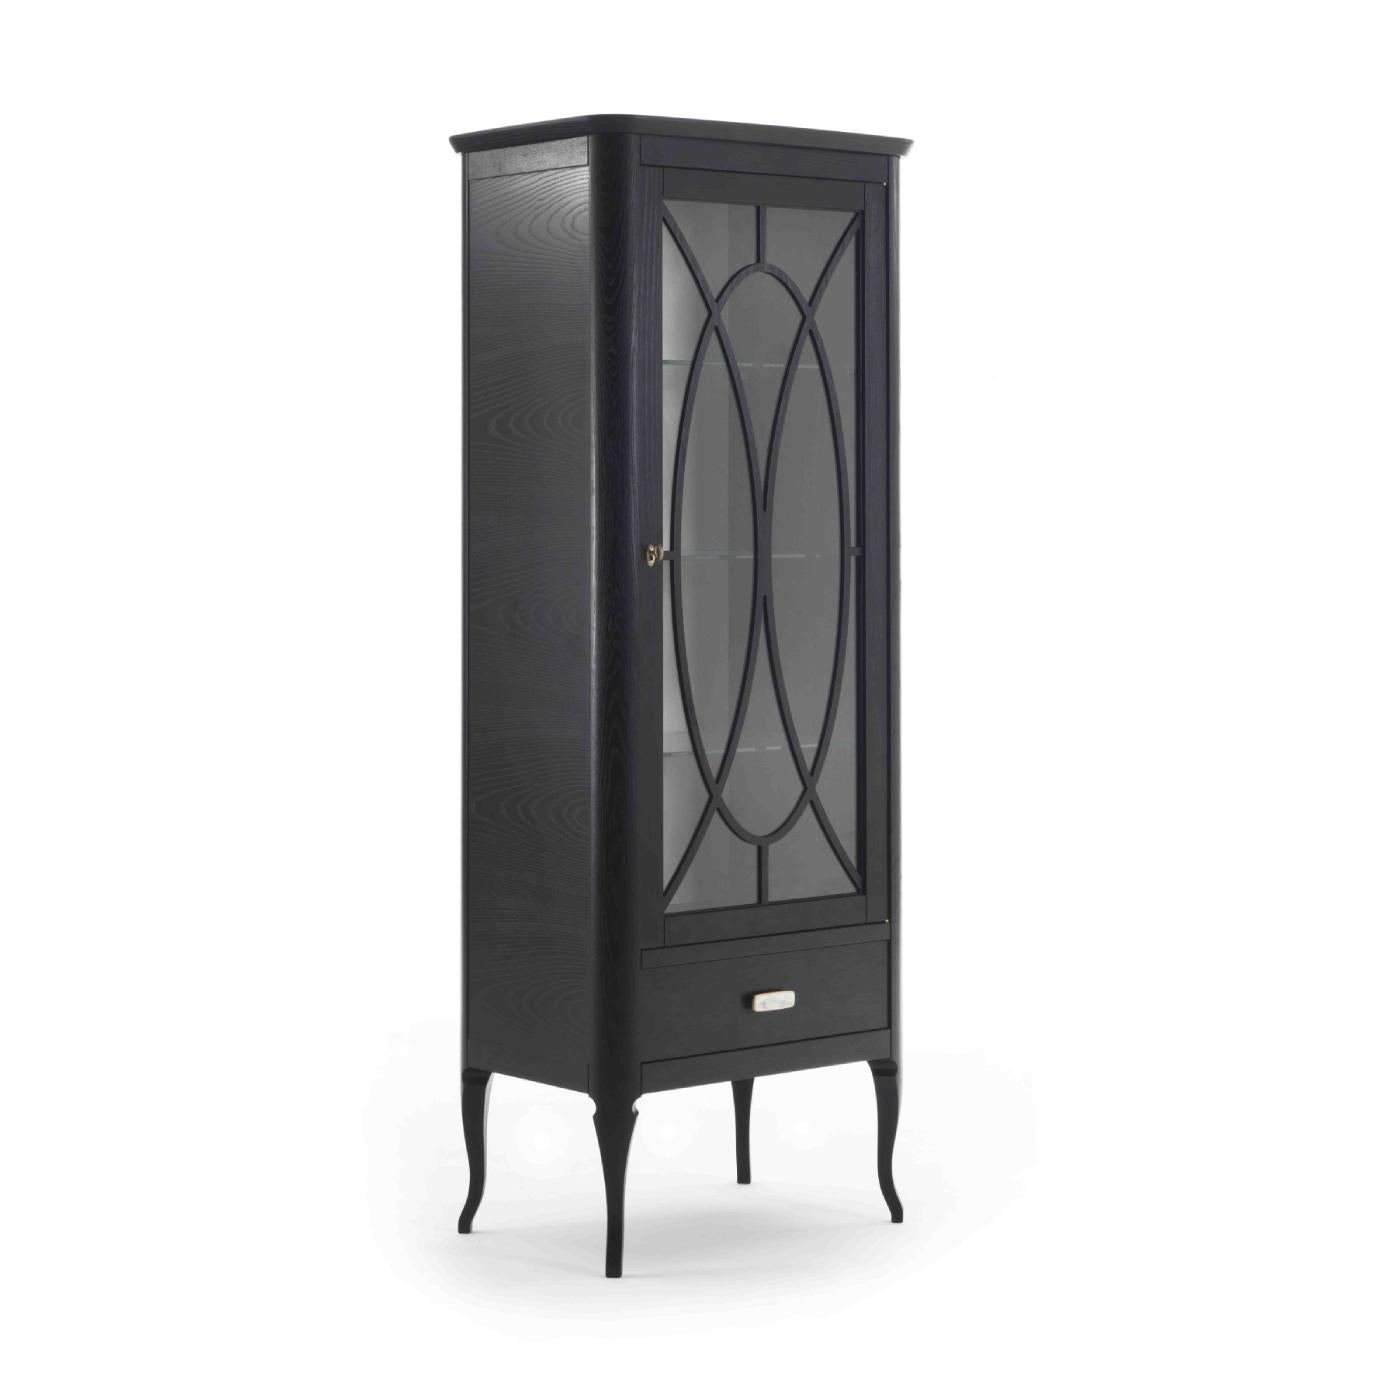 Simple yet sophisticated, this display cabinet will become the focal point in a living or dining room of a modern interior. Both elegant and functional, the wooden ash-veneered frame with an ebonized finish is raised on slender, cabriole-style legs